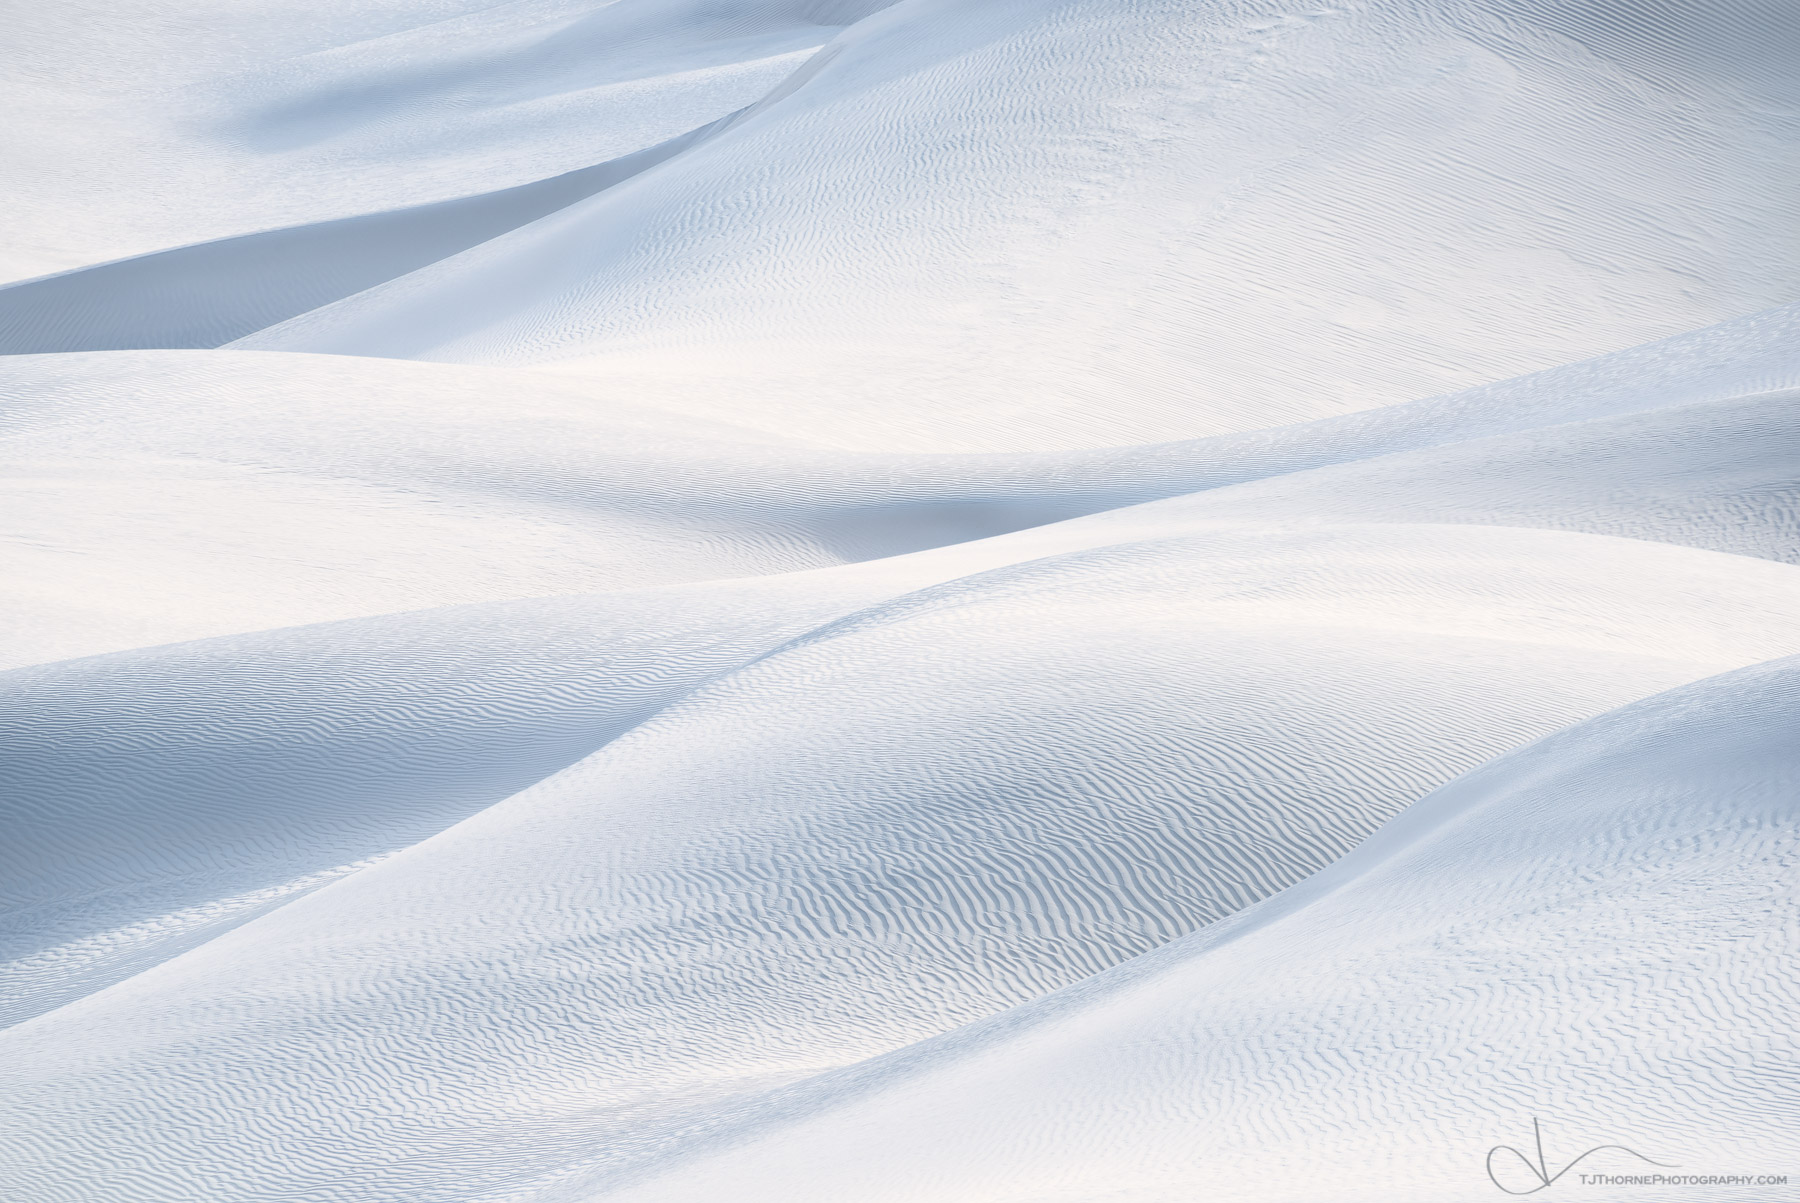 An intimate abstract view of soft light on sand dunes in Death Valley National Park, California.